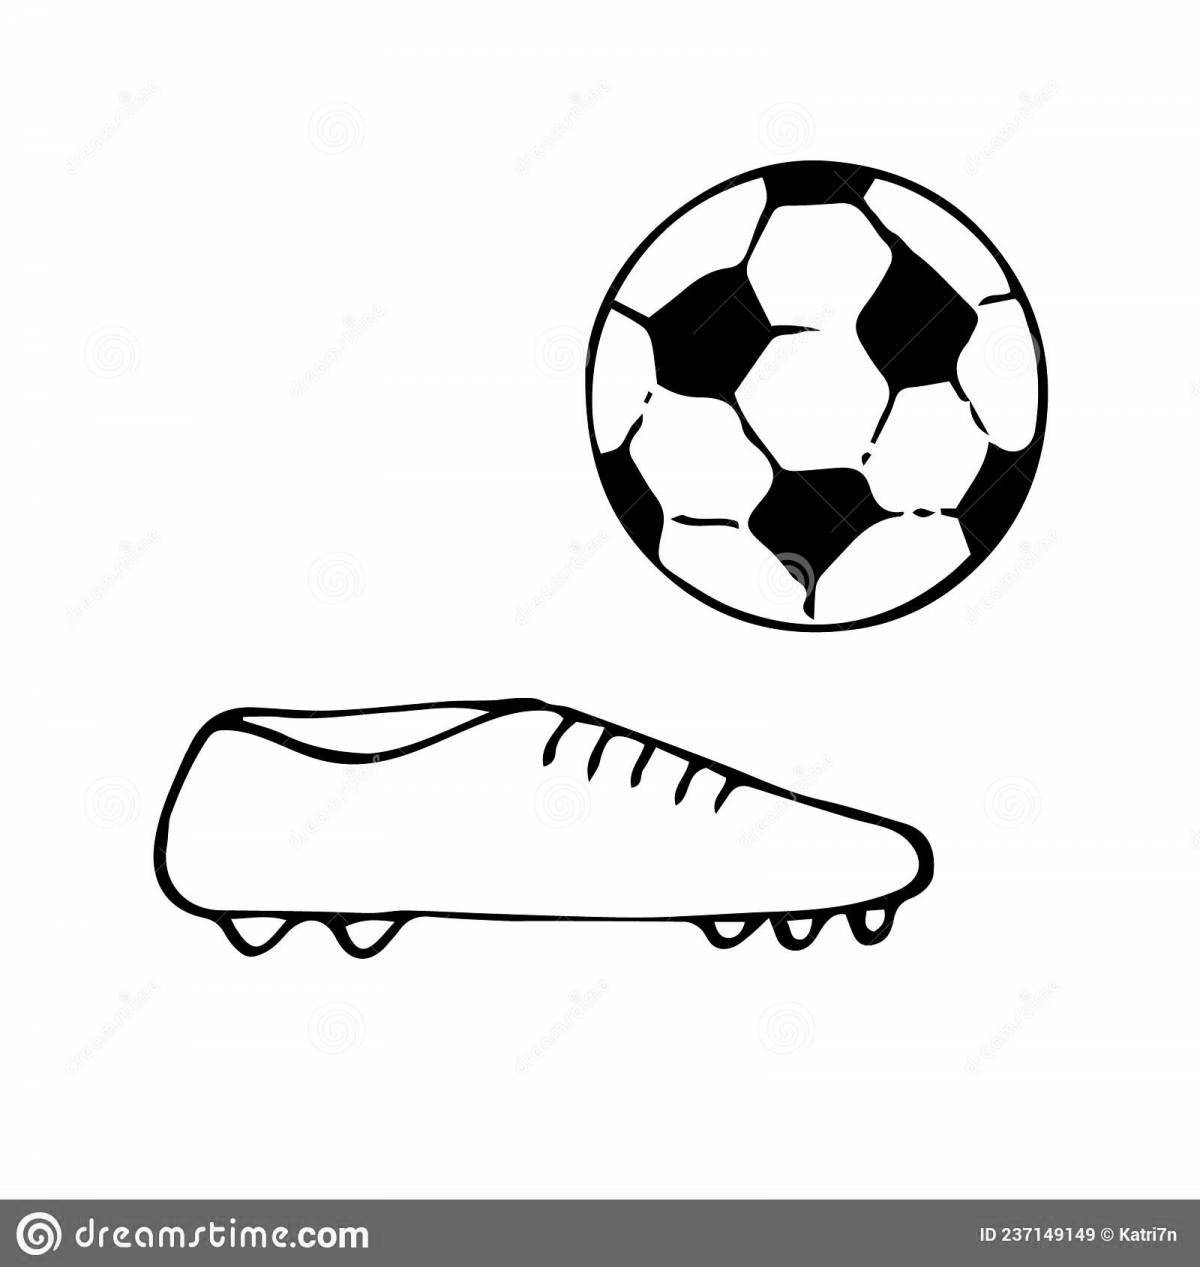 Coloring page playful football boots